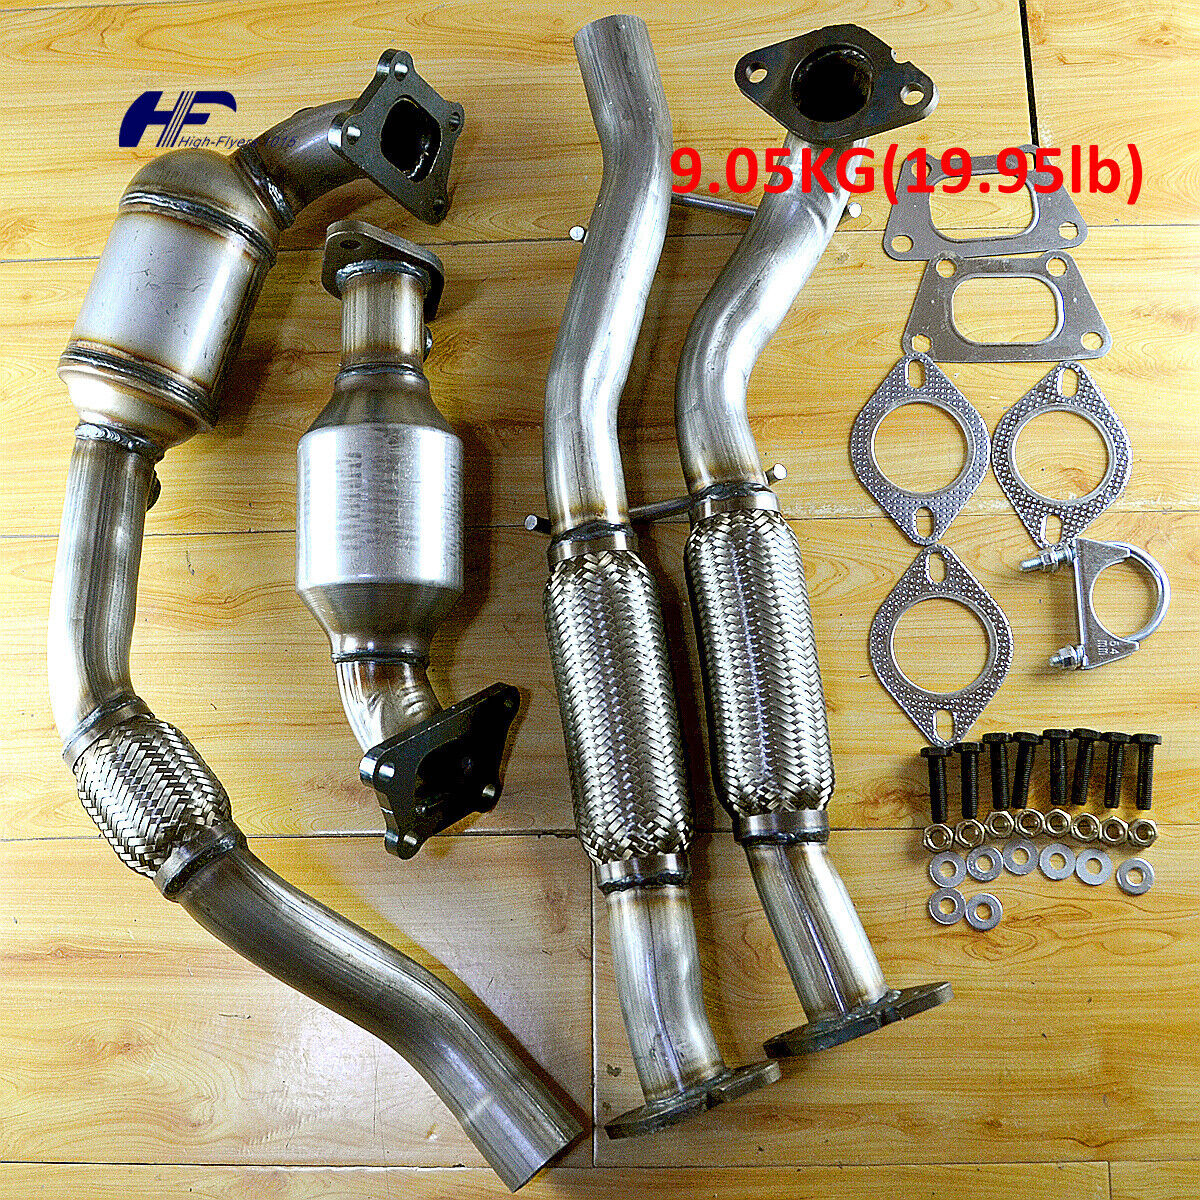 🔥 NEW For Cadillac SRX 3.6L Both Catalytic Converter & Flex Pipes 2012-2016 USA